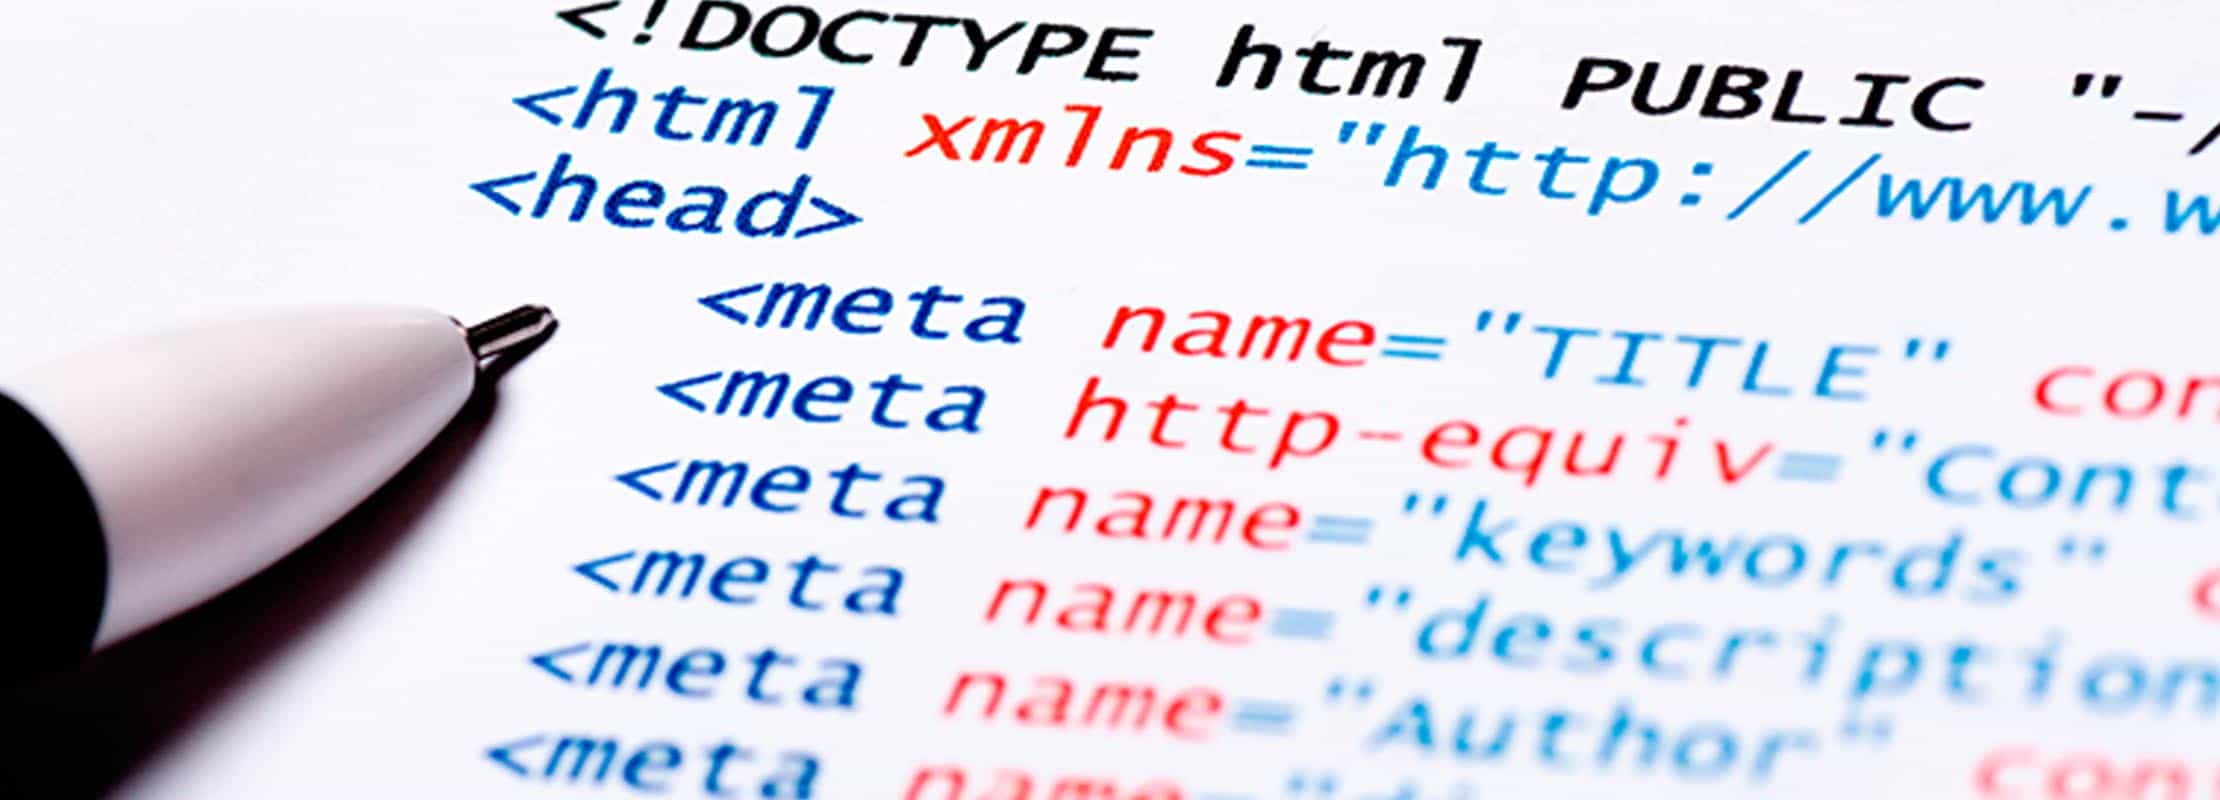 html code include different meta tags for on-page SEO|web design company in kerala